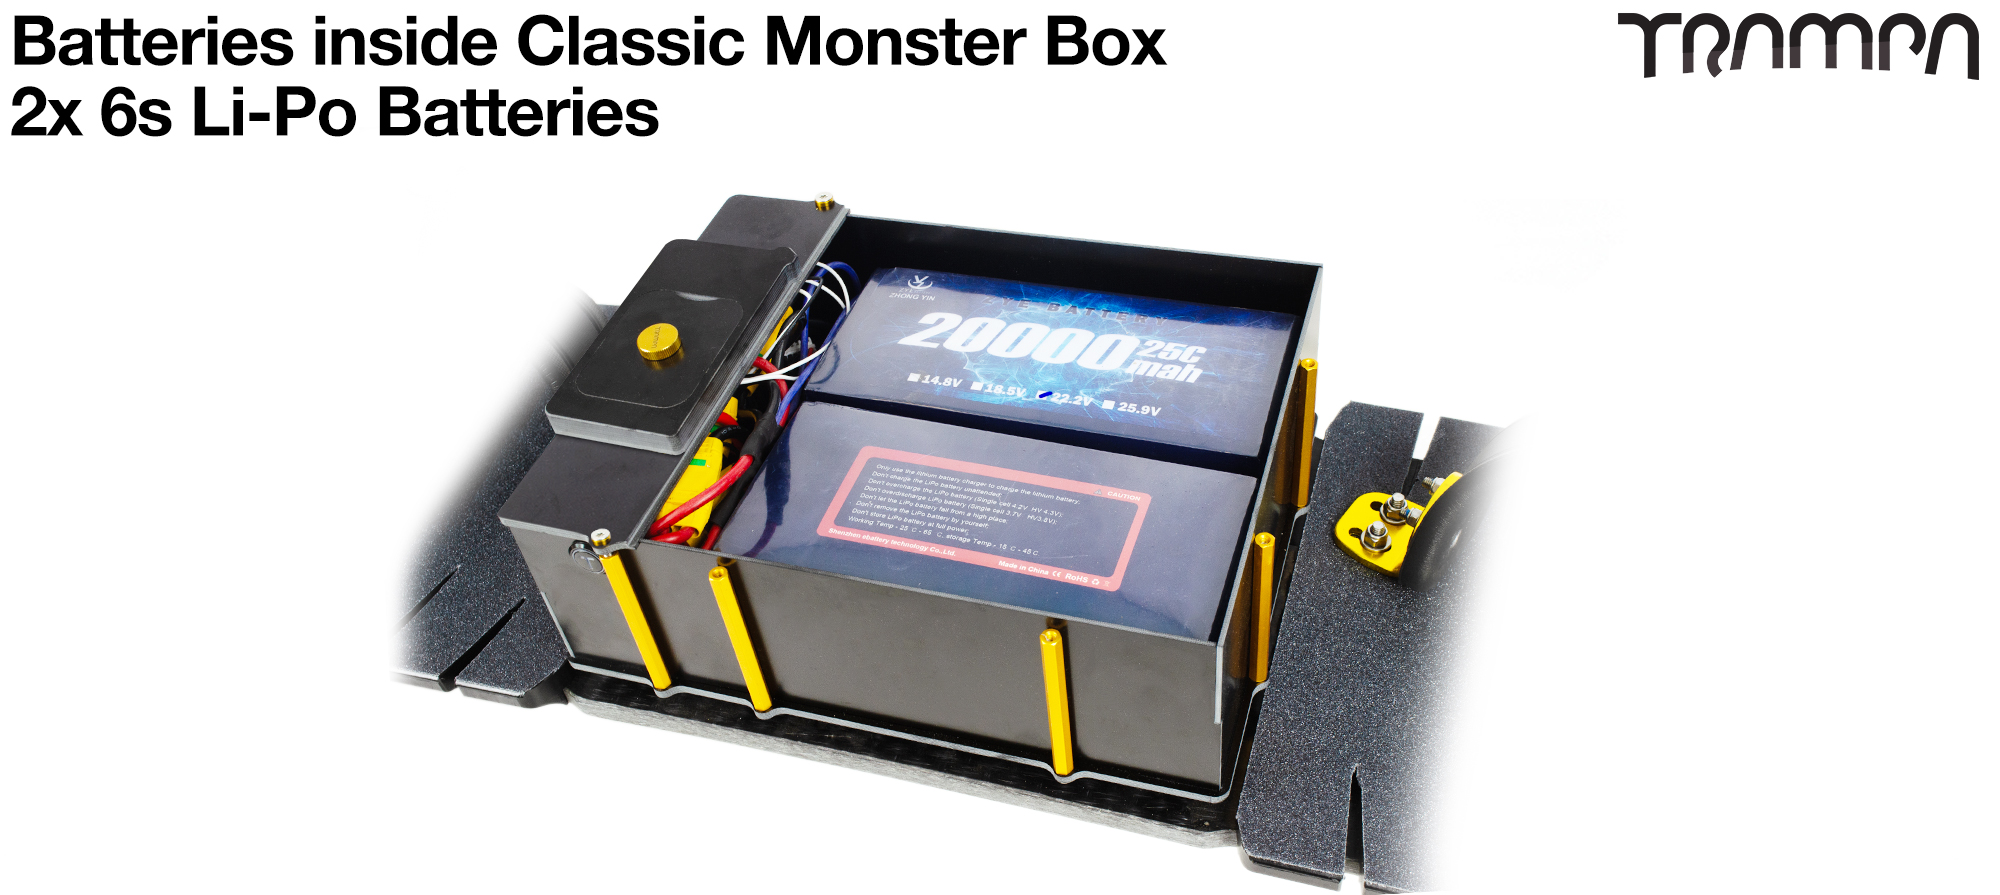 Classic MONSTER Box - 18650 Cell Pack 12s7p 21A or upto 2x22000 mAh Lipos & panel options to fit any of the TRAMPA VESC Speed controllers internally!!